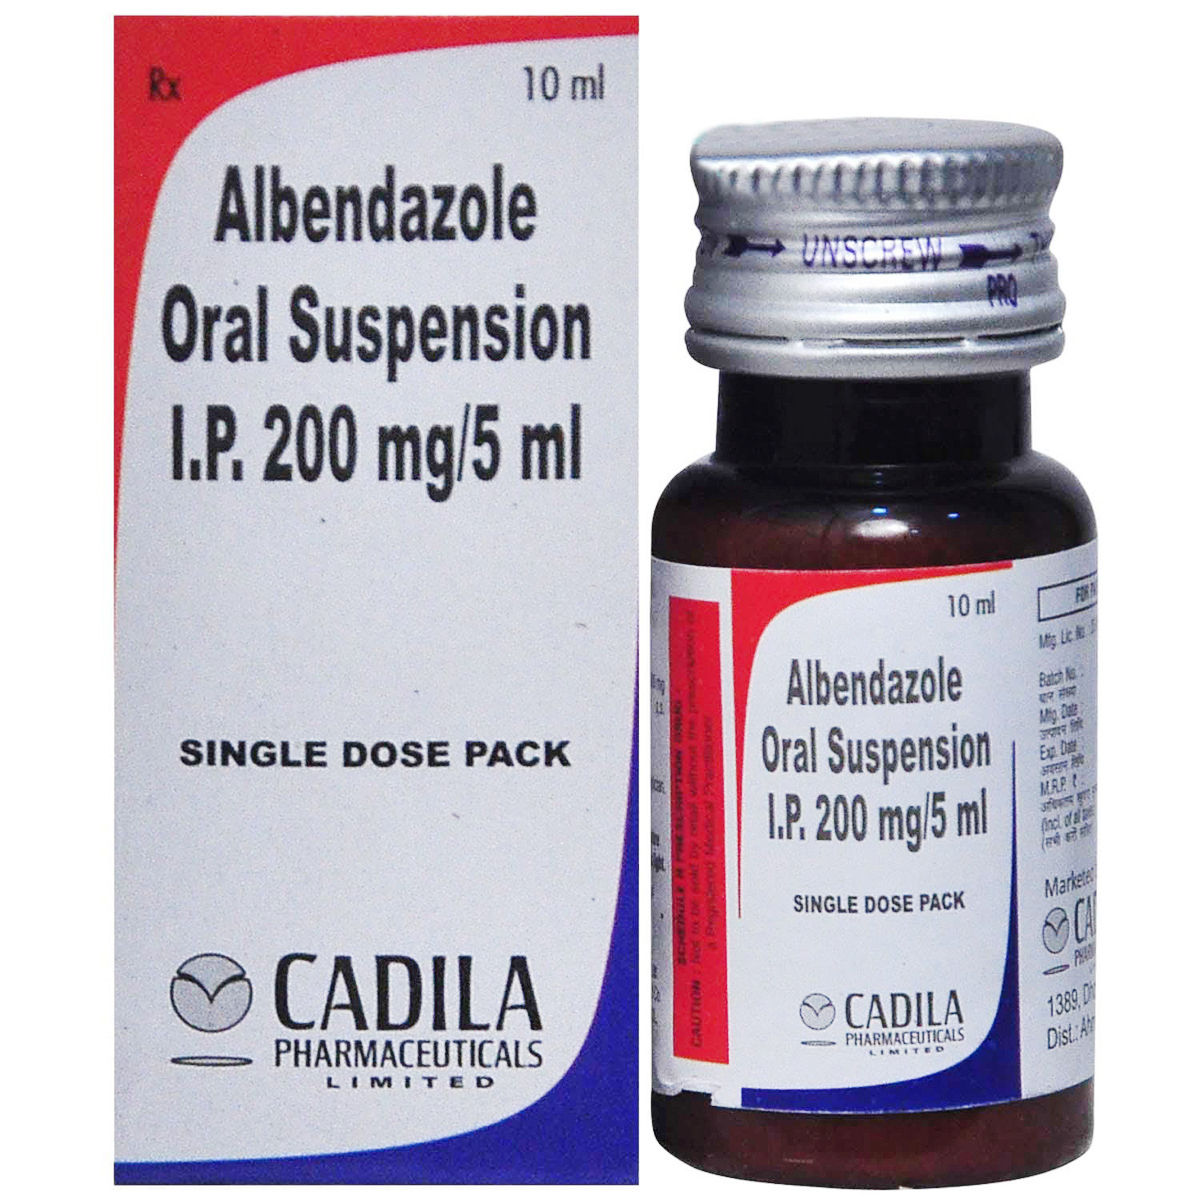 Albendazole Oral Suspension 10 ml Price, Uses, Side Effects